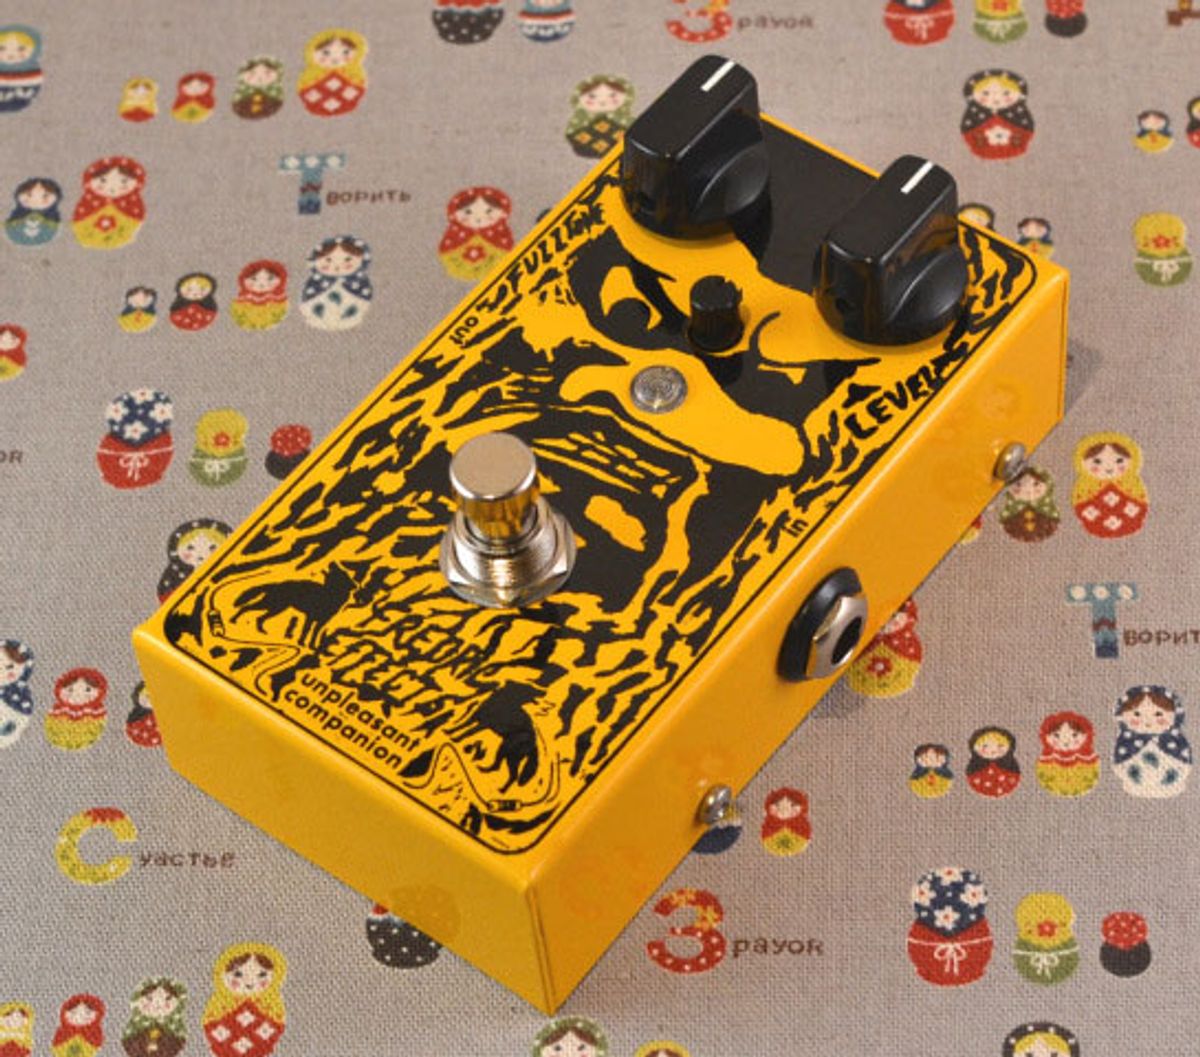 Fredric Effects Introduces the Unpleasant Companion MKII